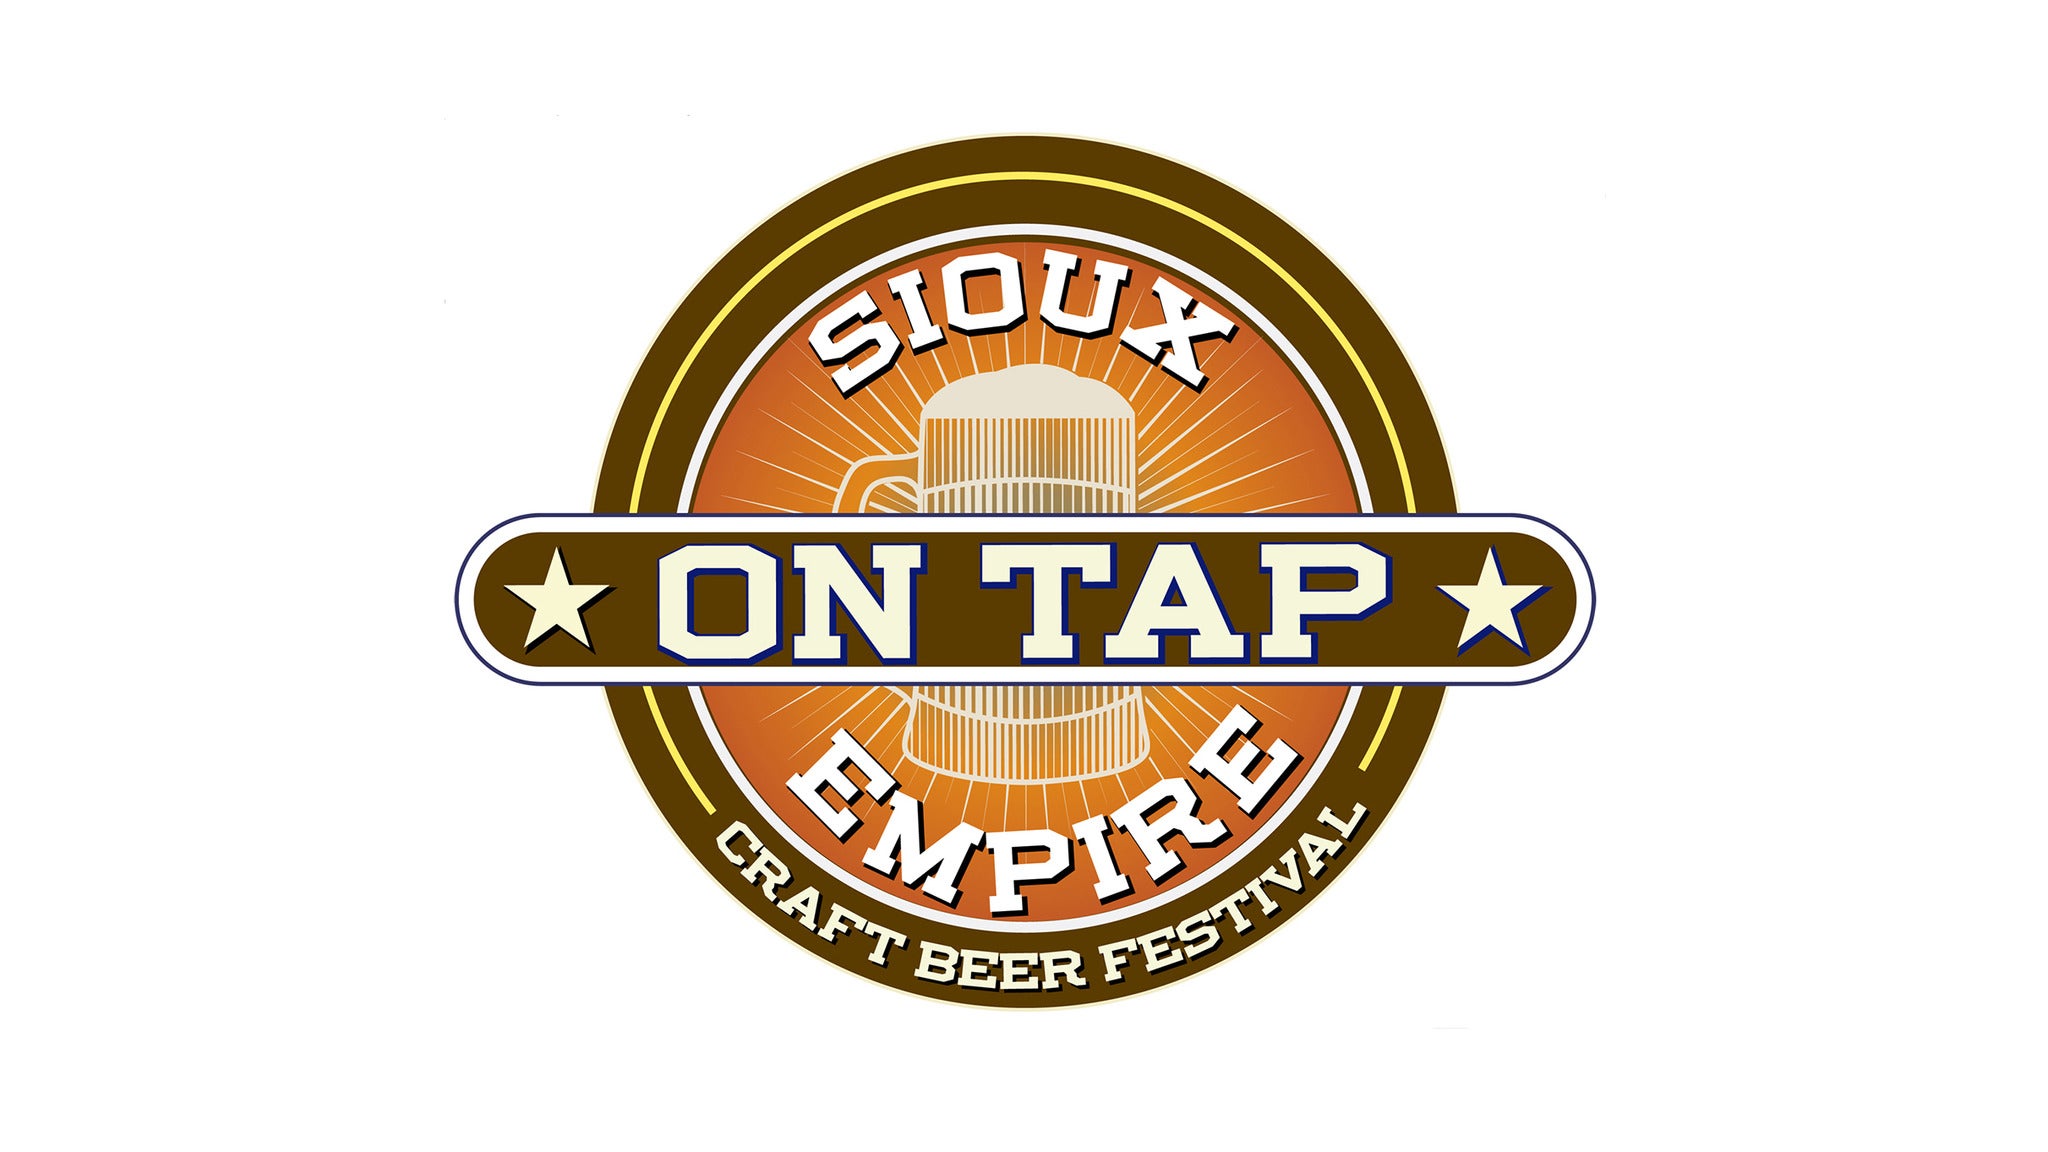 Sioux Empire On Tap in Sioux Falls promo photo for Tier 1 Pricing presale offer code